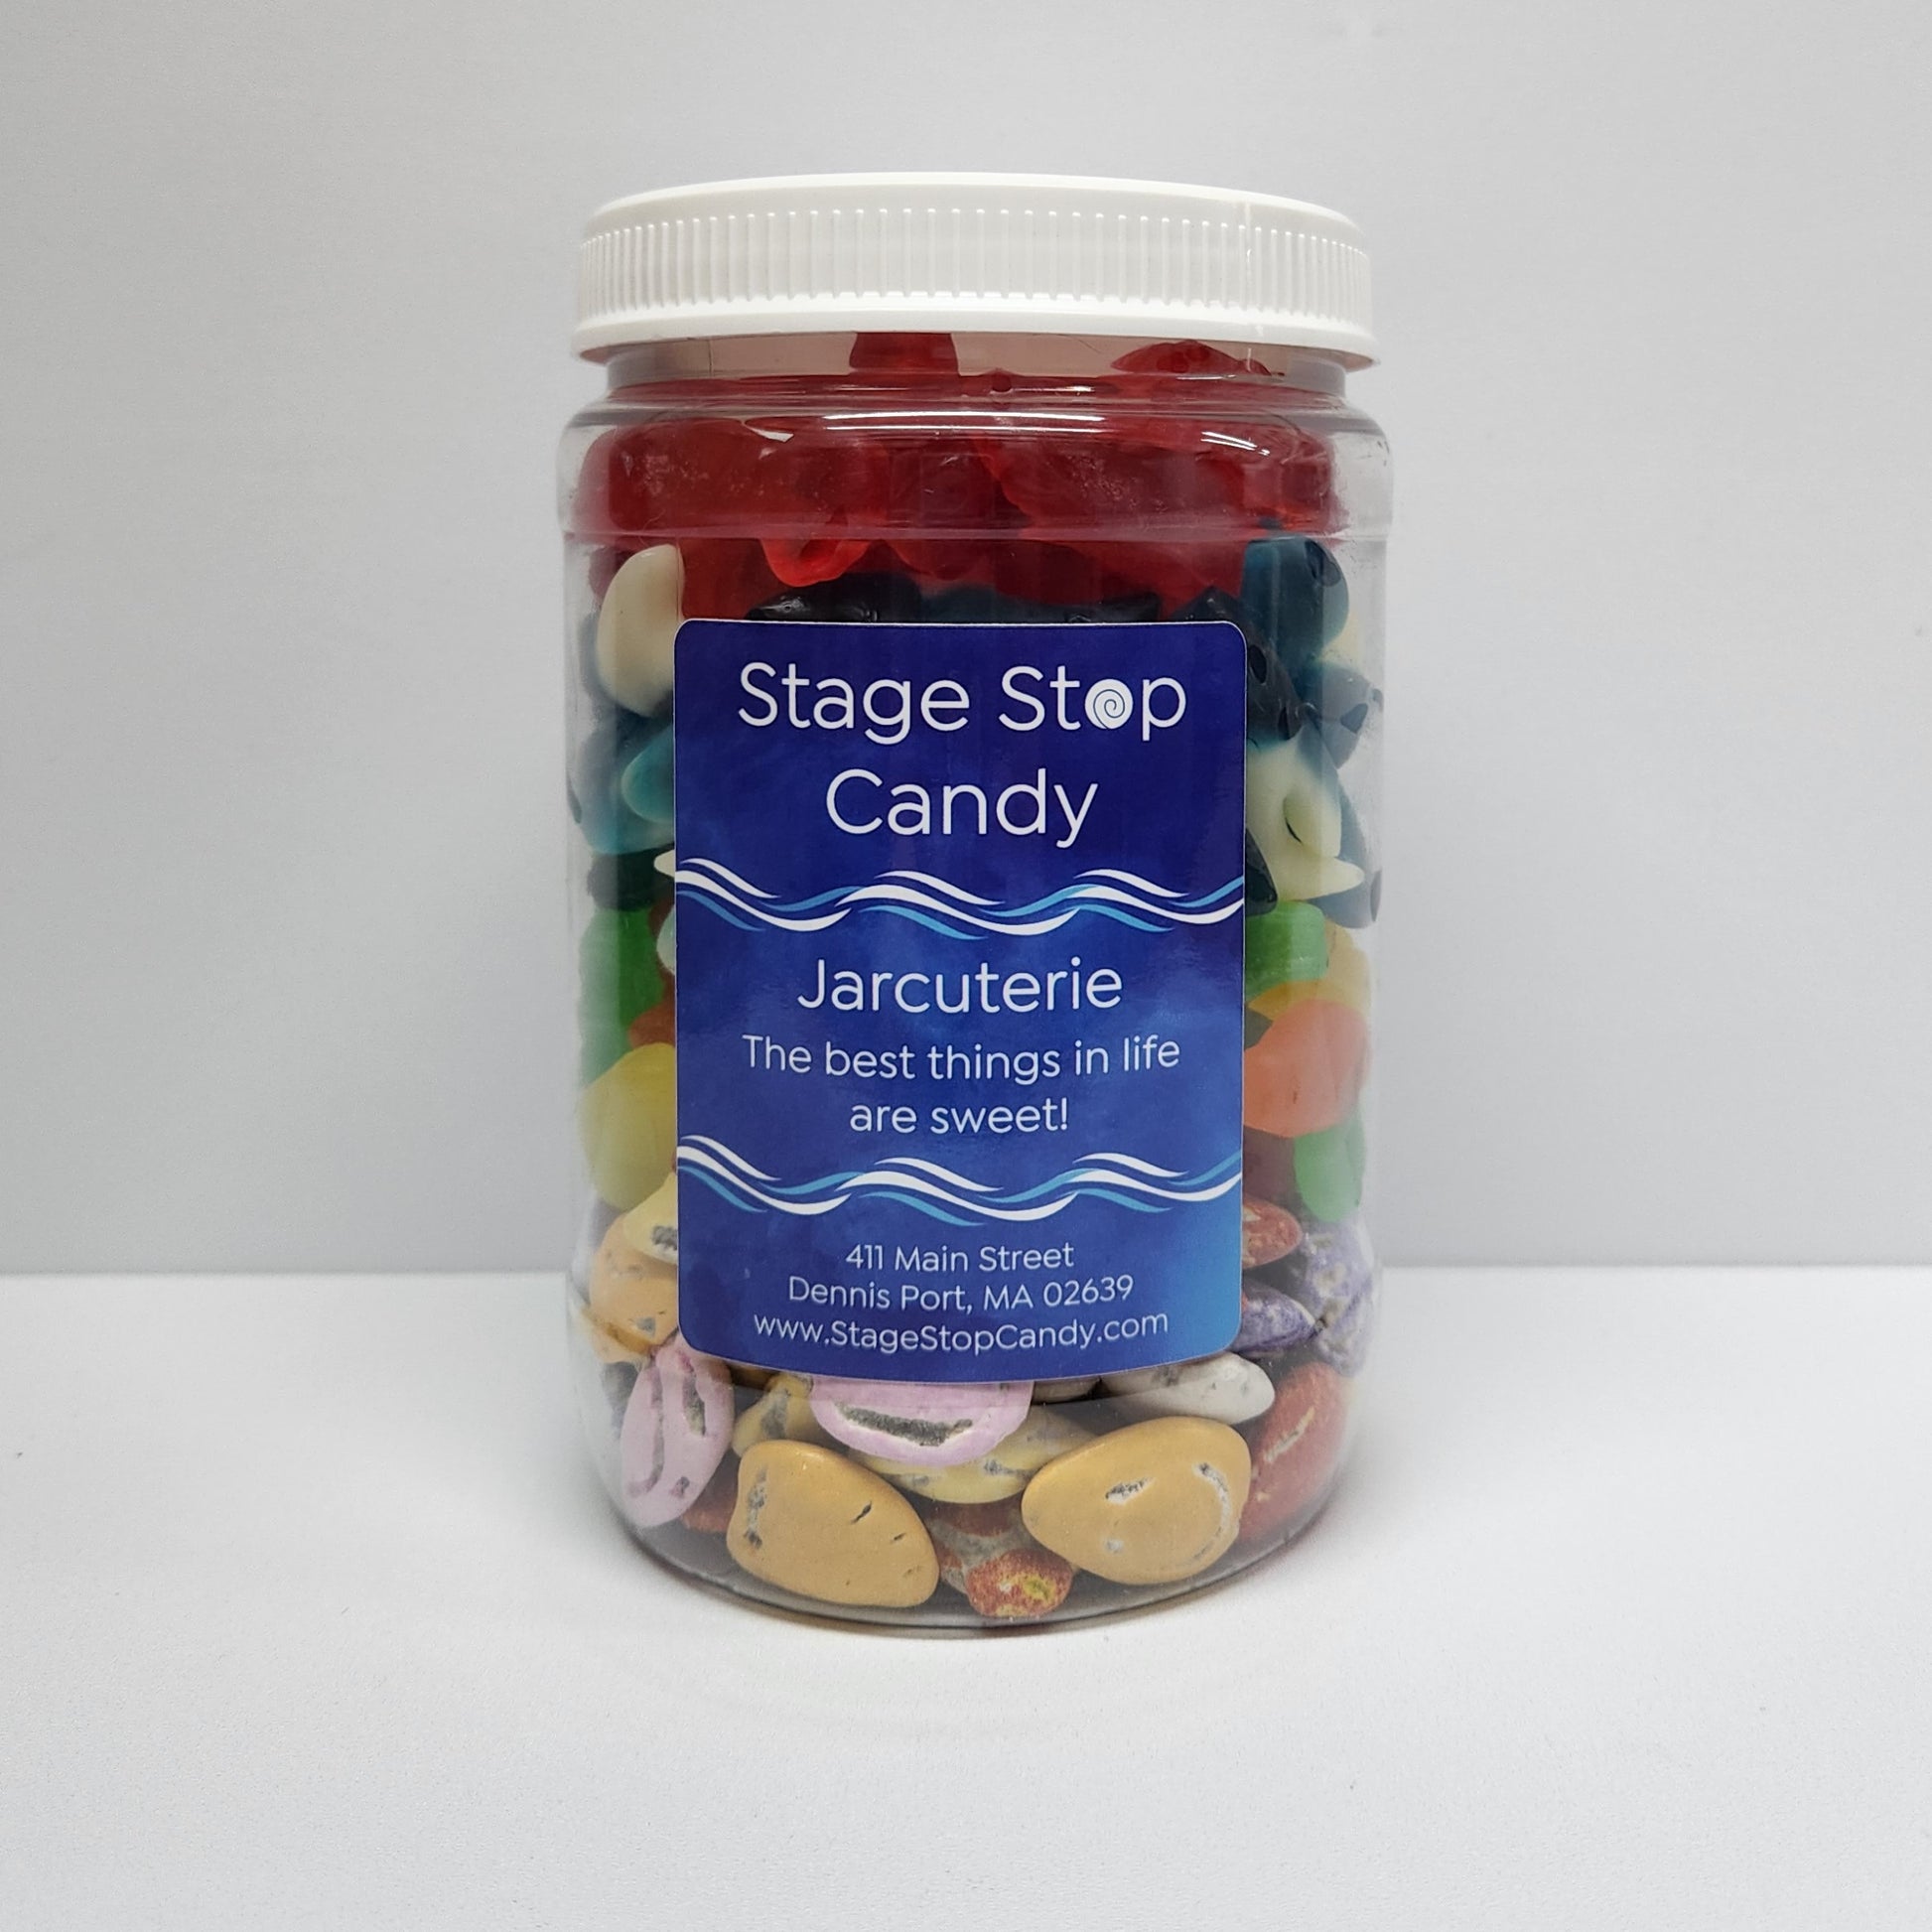 Stage Stop Candy's Beach Day Jarcuterie Jar features a layers of multi-colored milk chocolate sea shells, Gummi Fish, Gummi Sharks and Gummi Lobsters. 